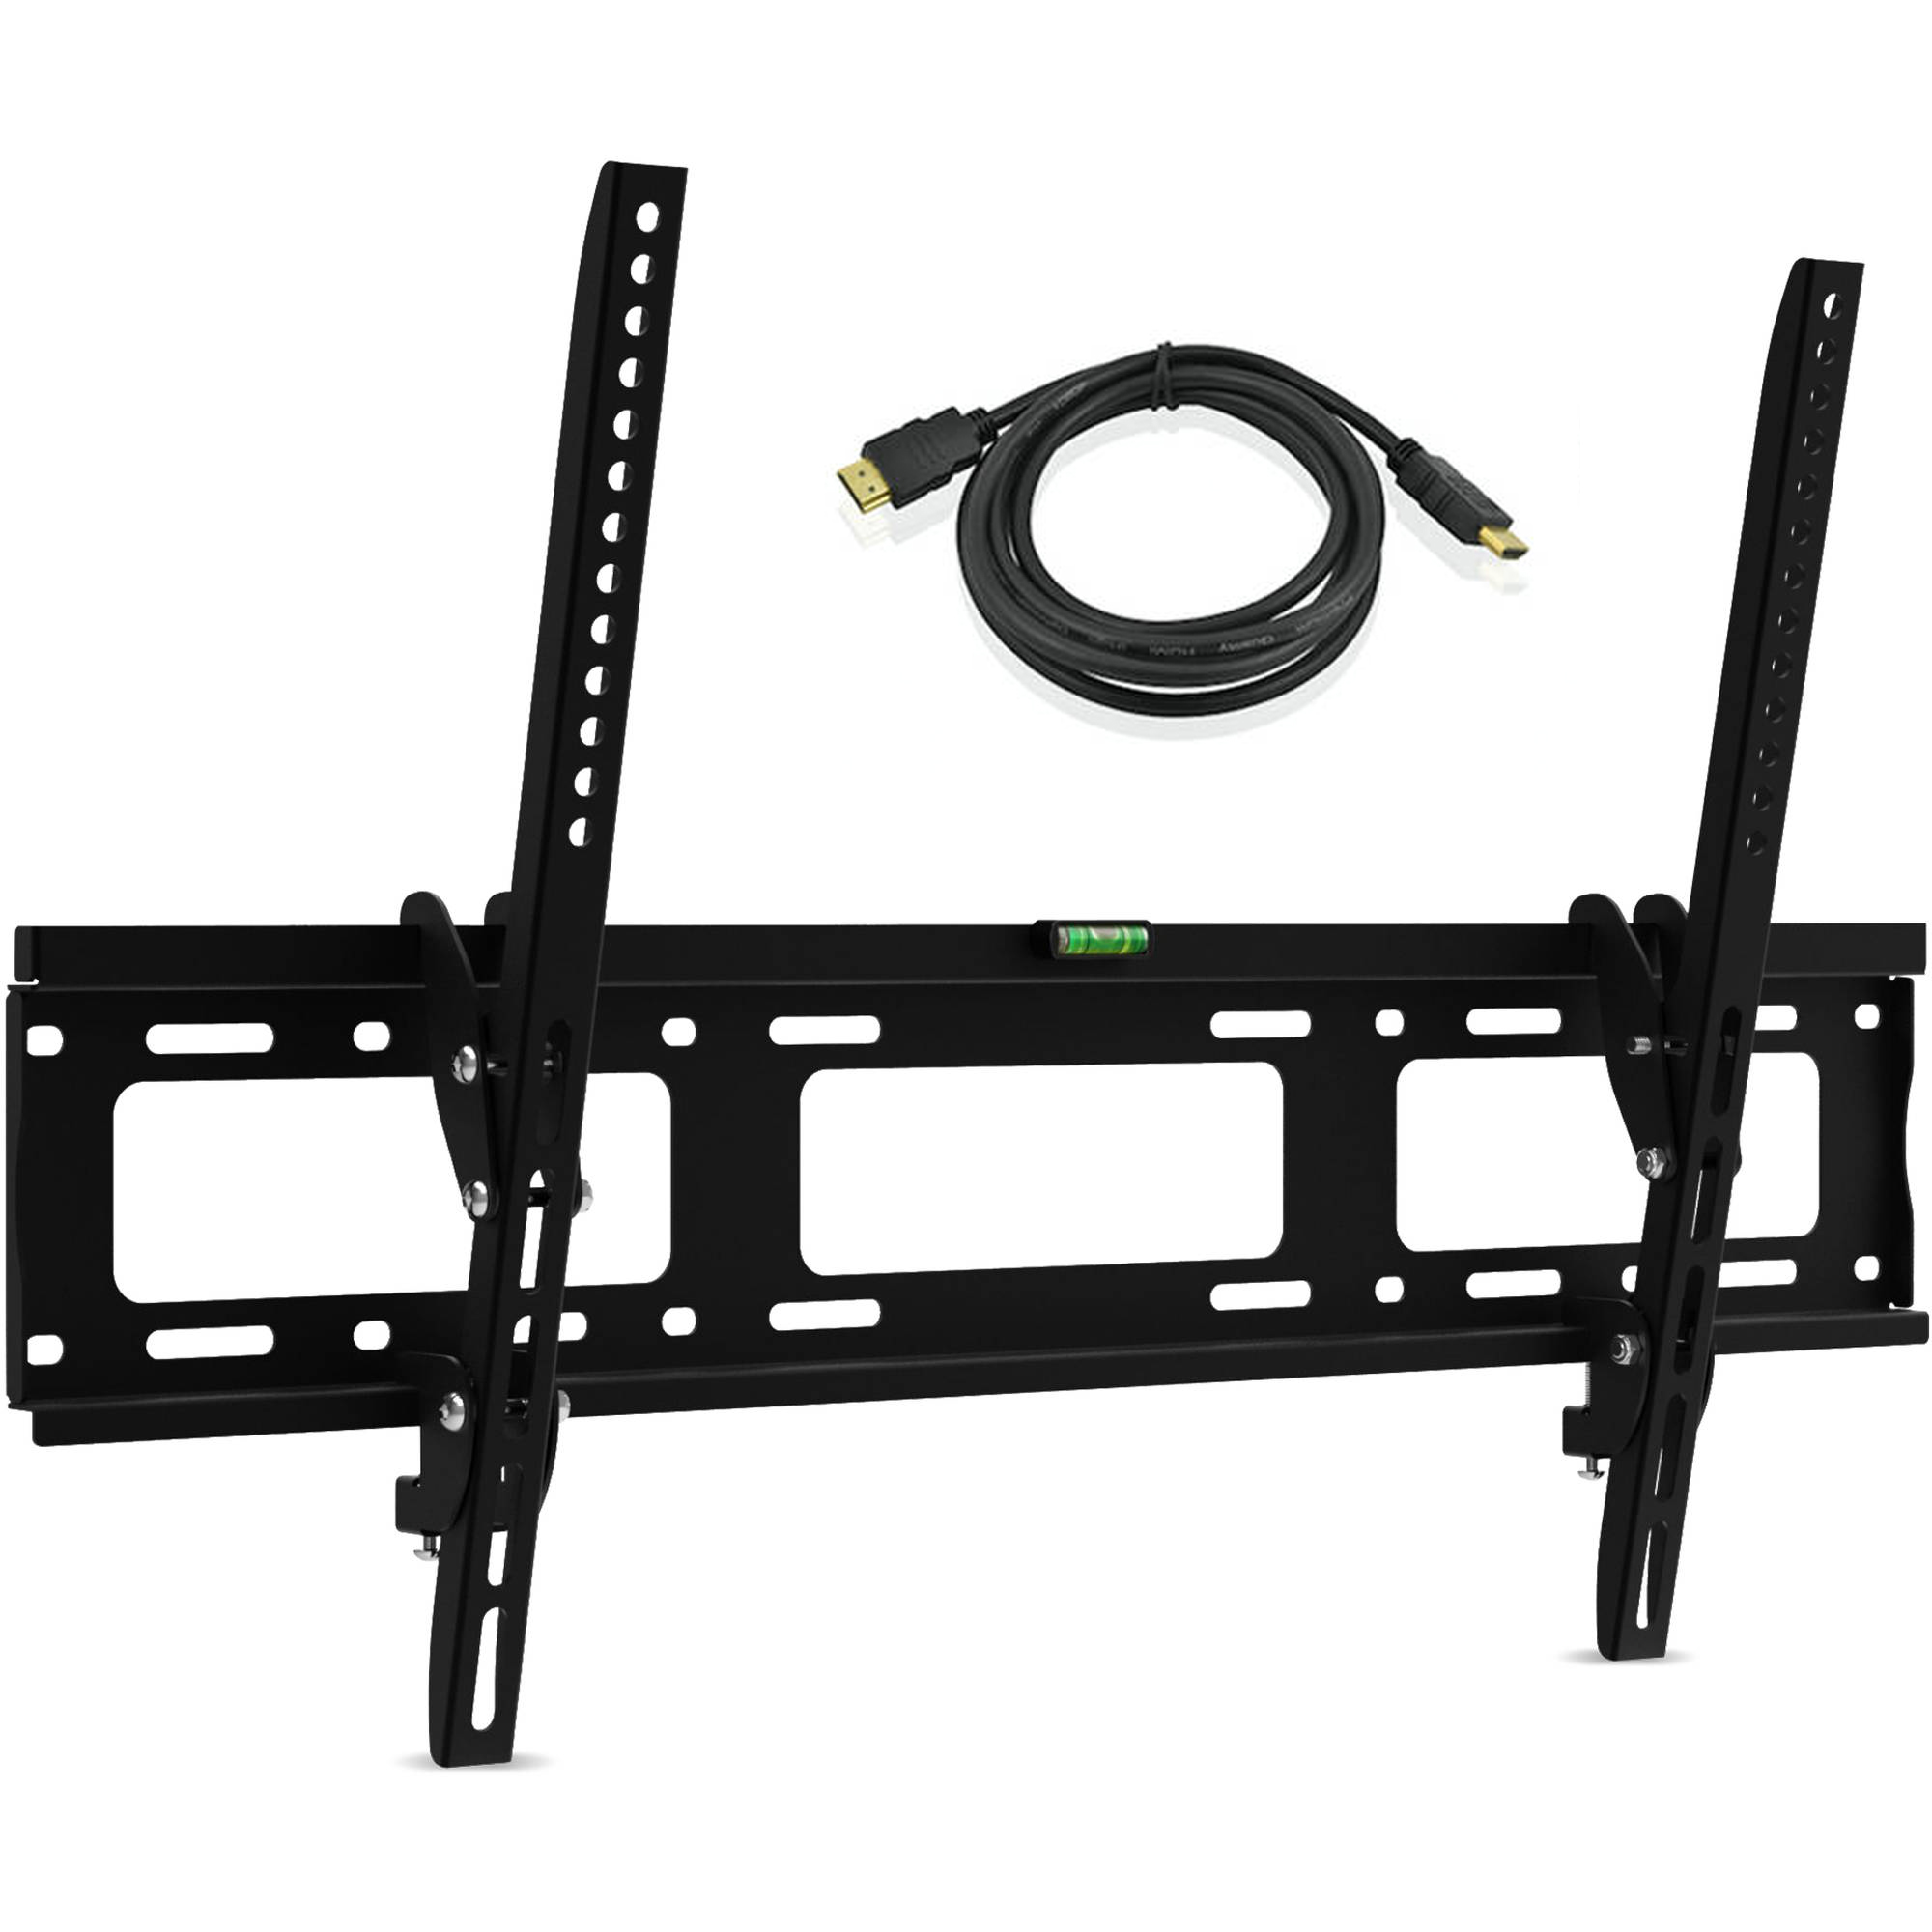 Ematic 30"-79" Tilt/Swivel Universal TV Wall Mount with HDMI Cable (EMW6101) - image 1 of 11